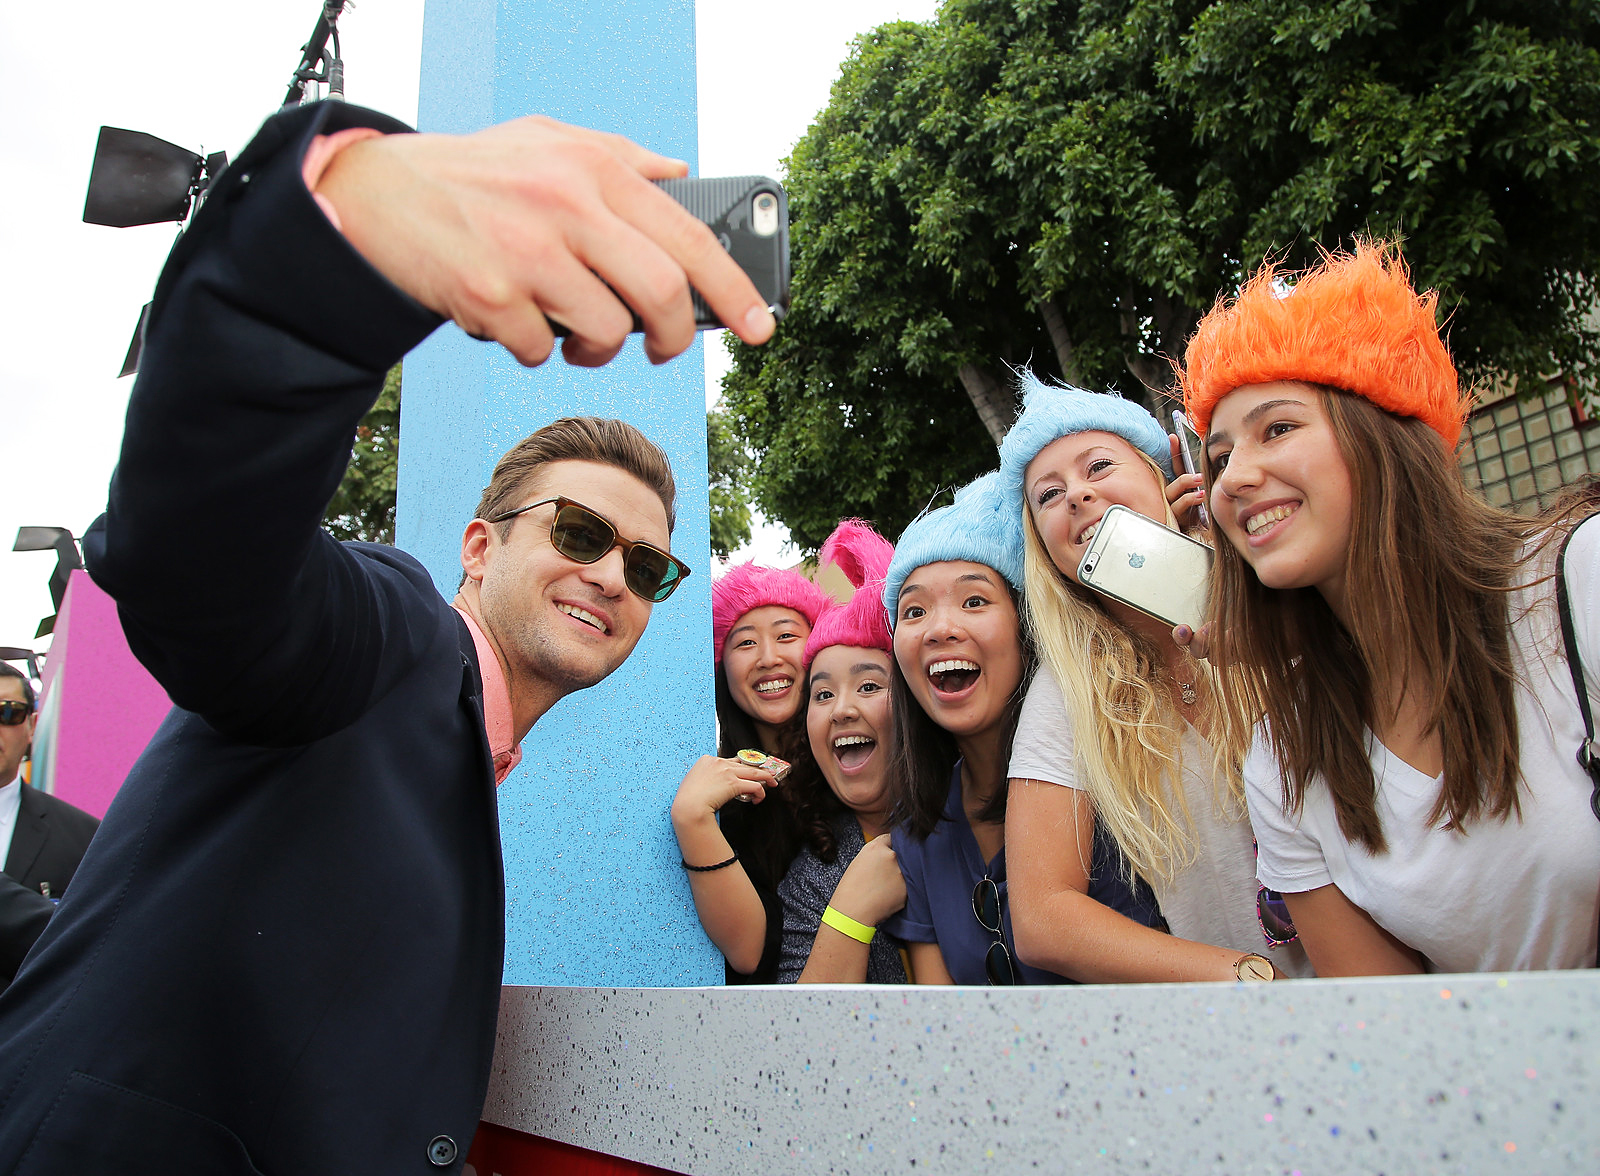 Justin Timberlake and fans at the Trolls film premiere in Los Angeles, on Oct. 23, 2016.